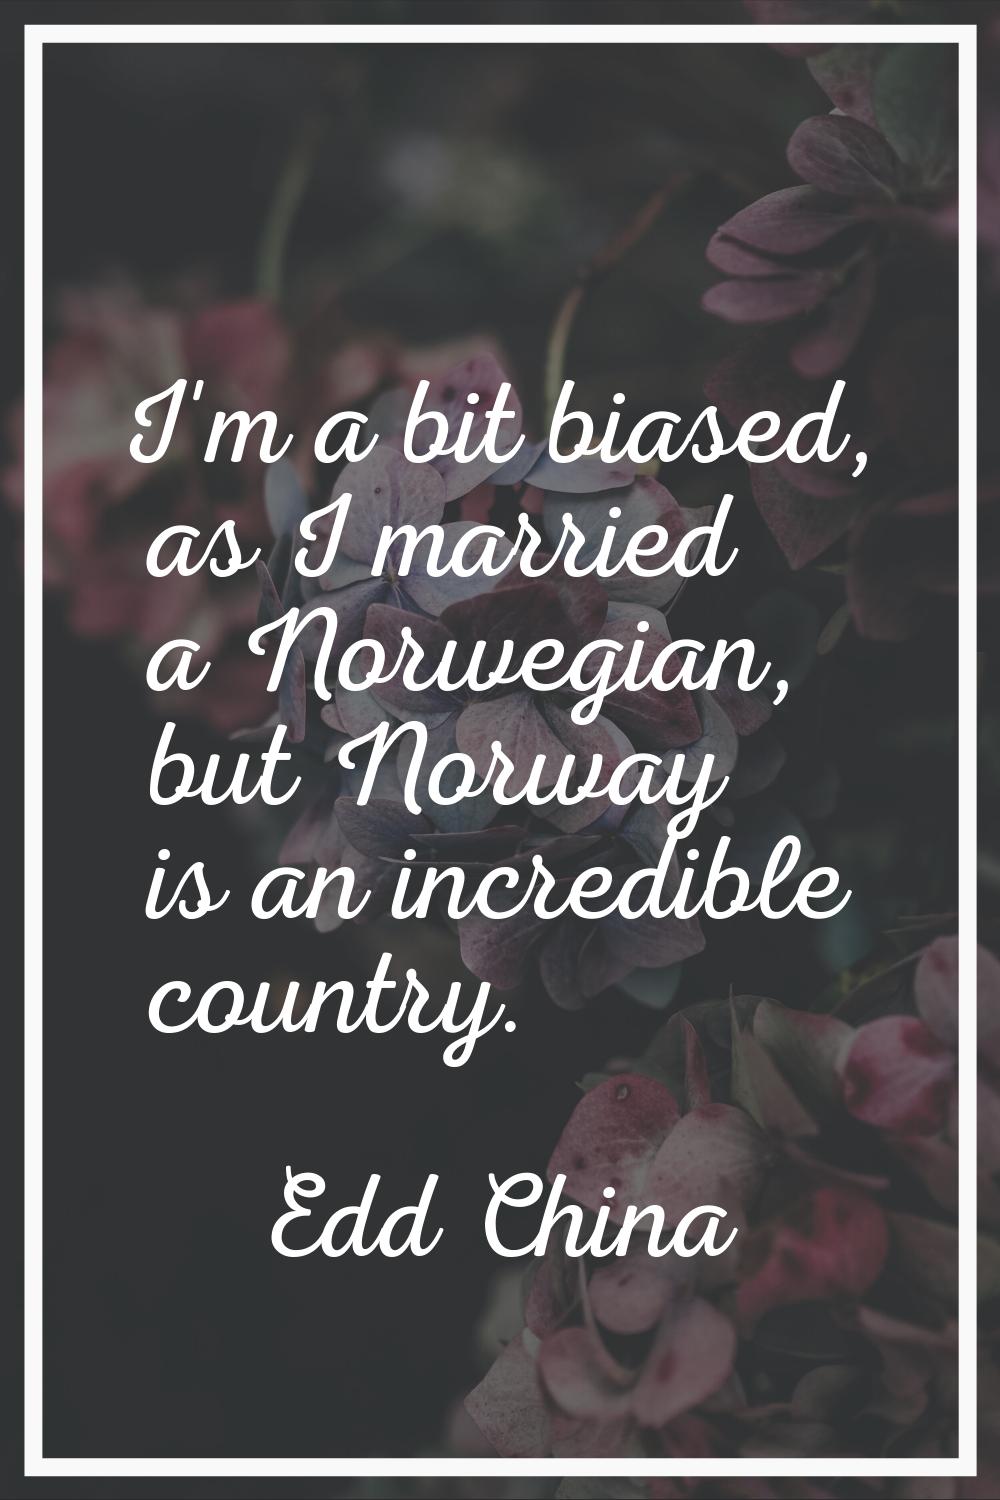 I'm a bit biased, as I married a Norwegian, but Norway is an incredible country.